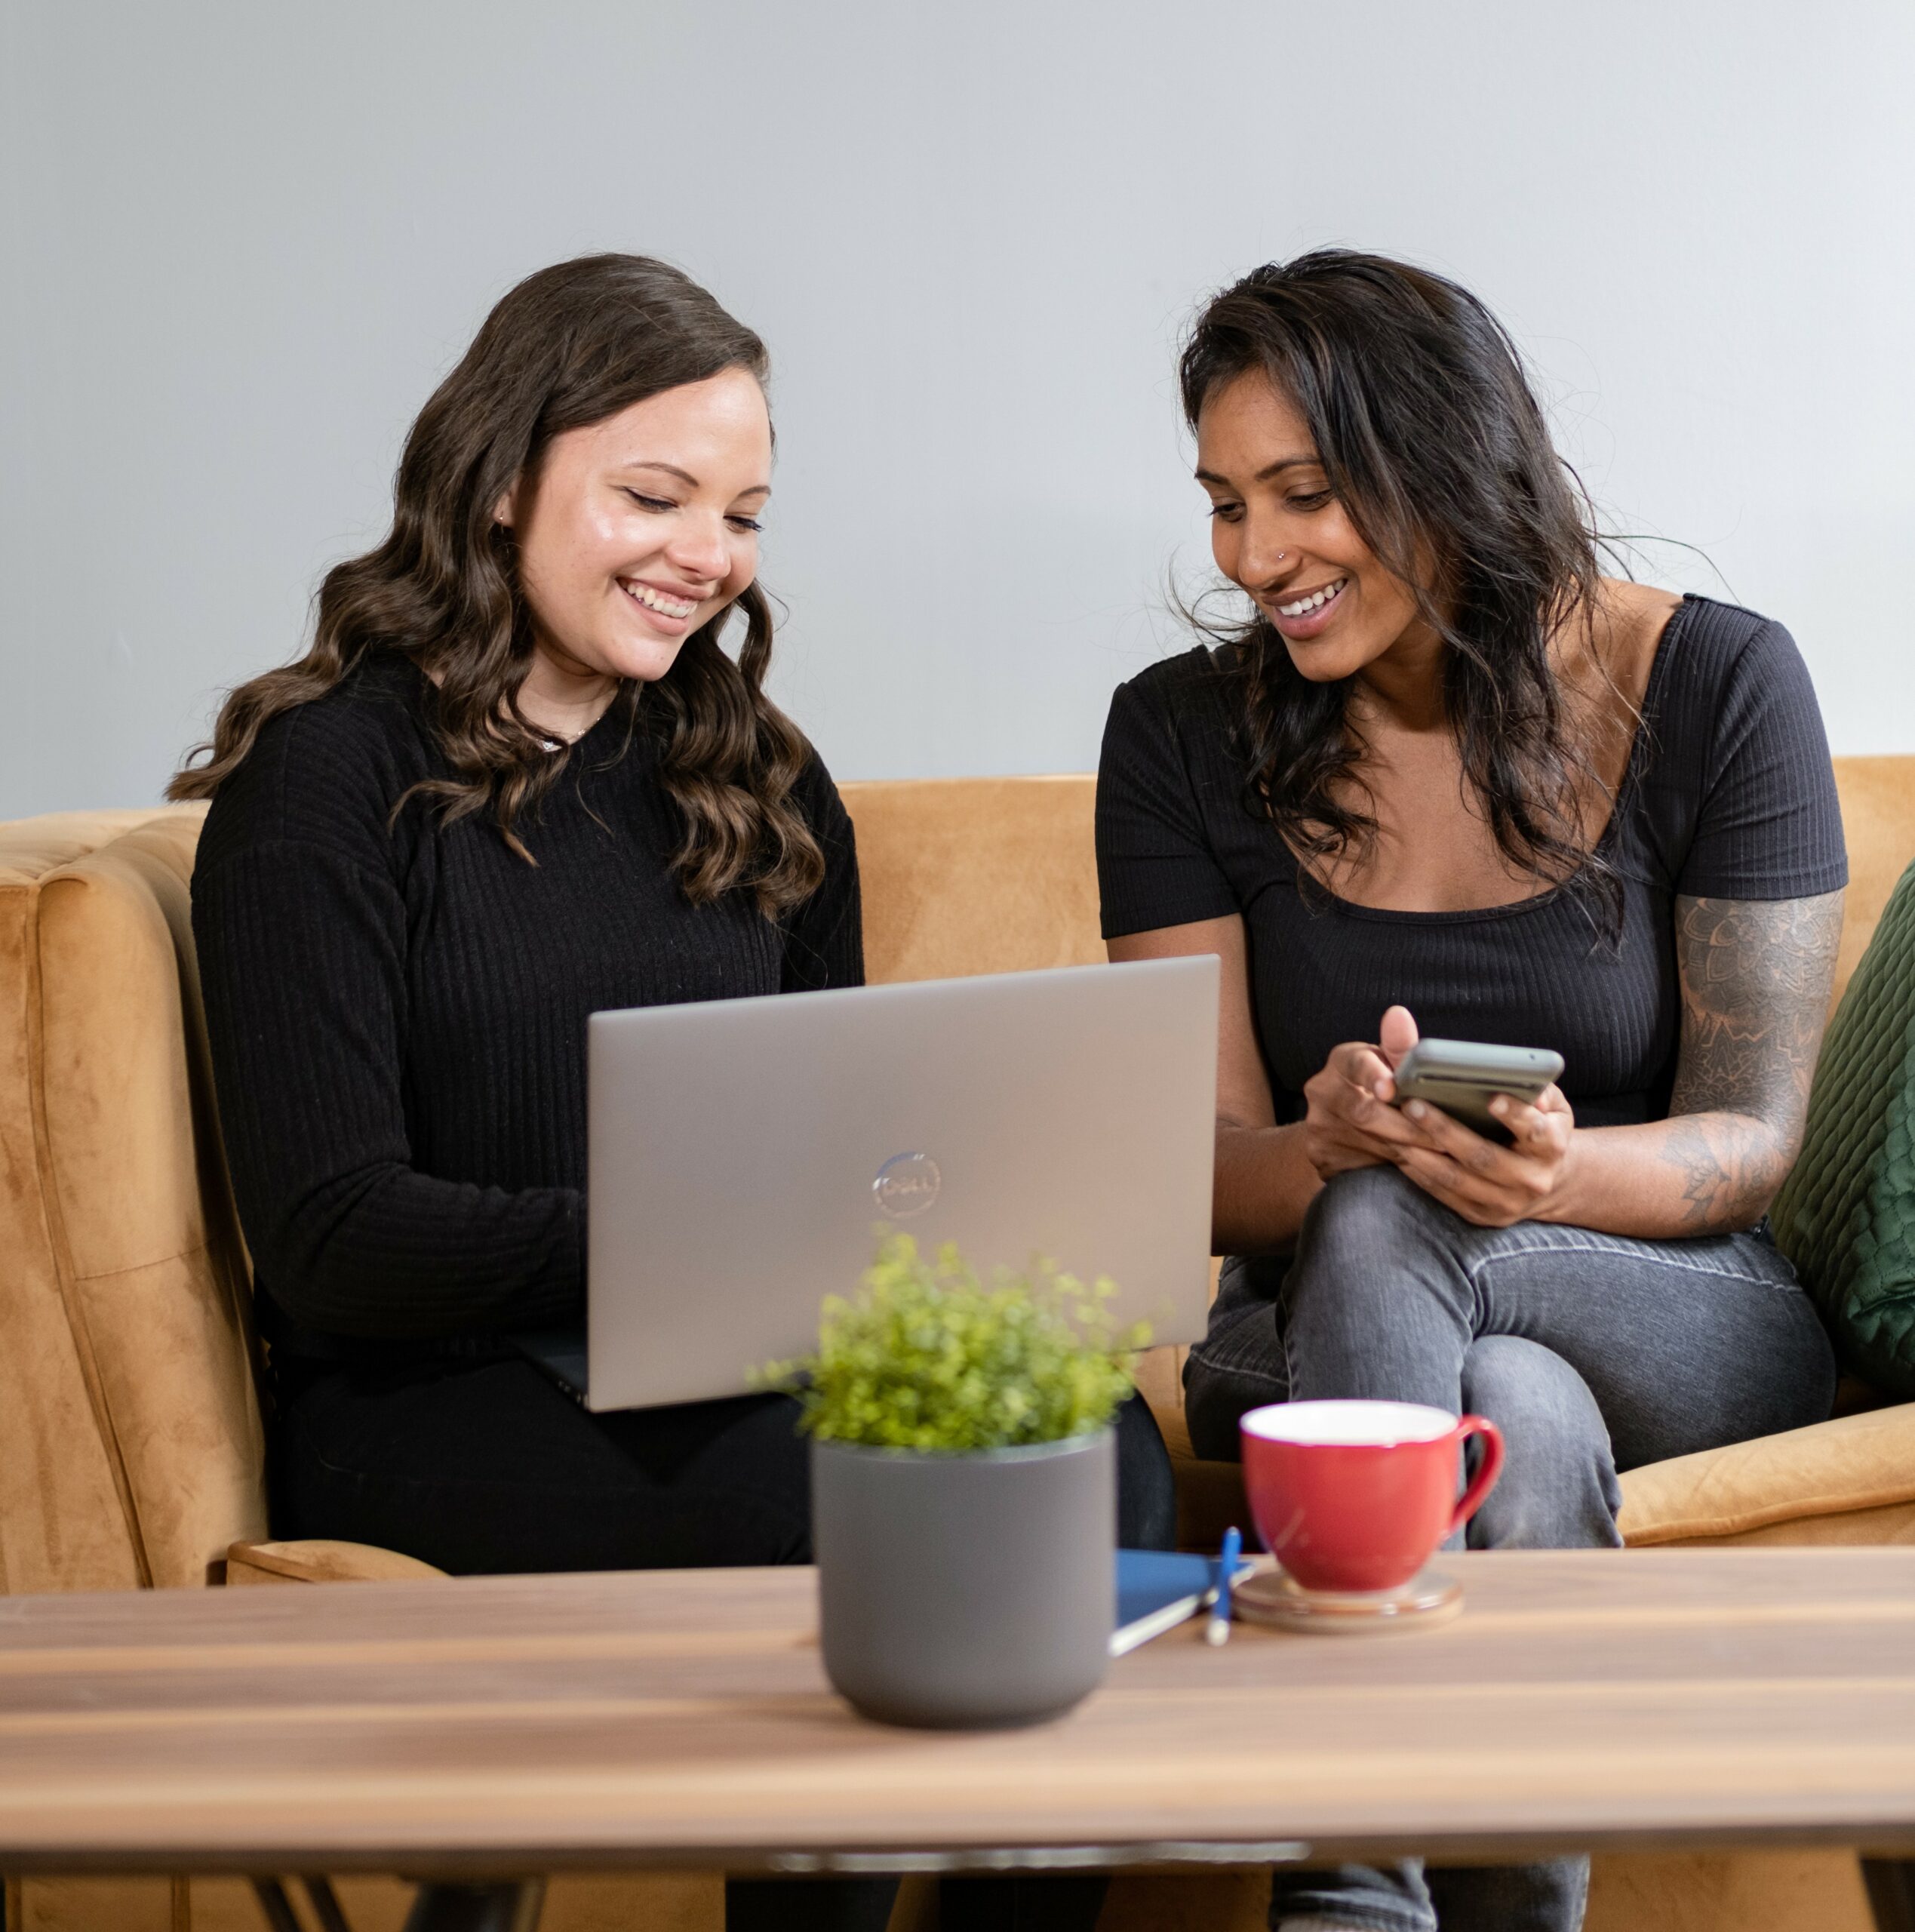 Two women sitting on a beige couch smiling at a laptop